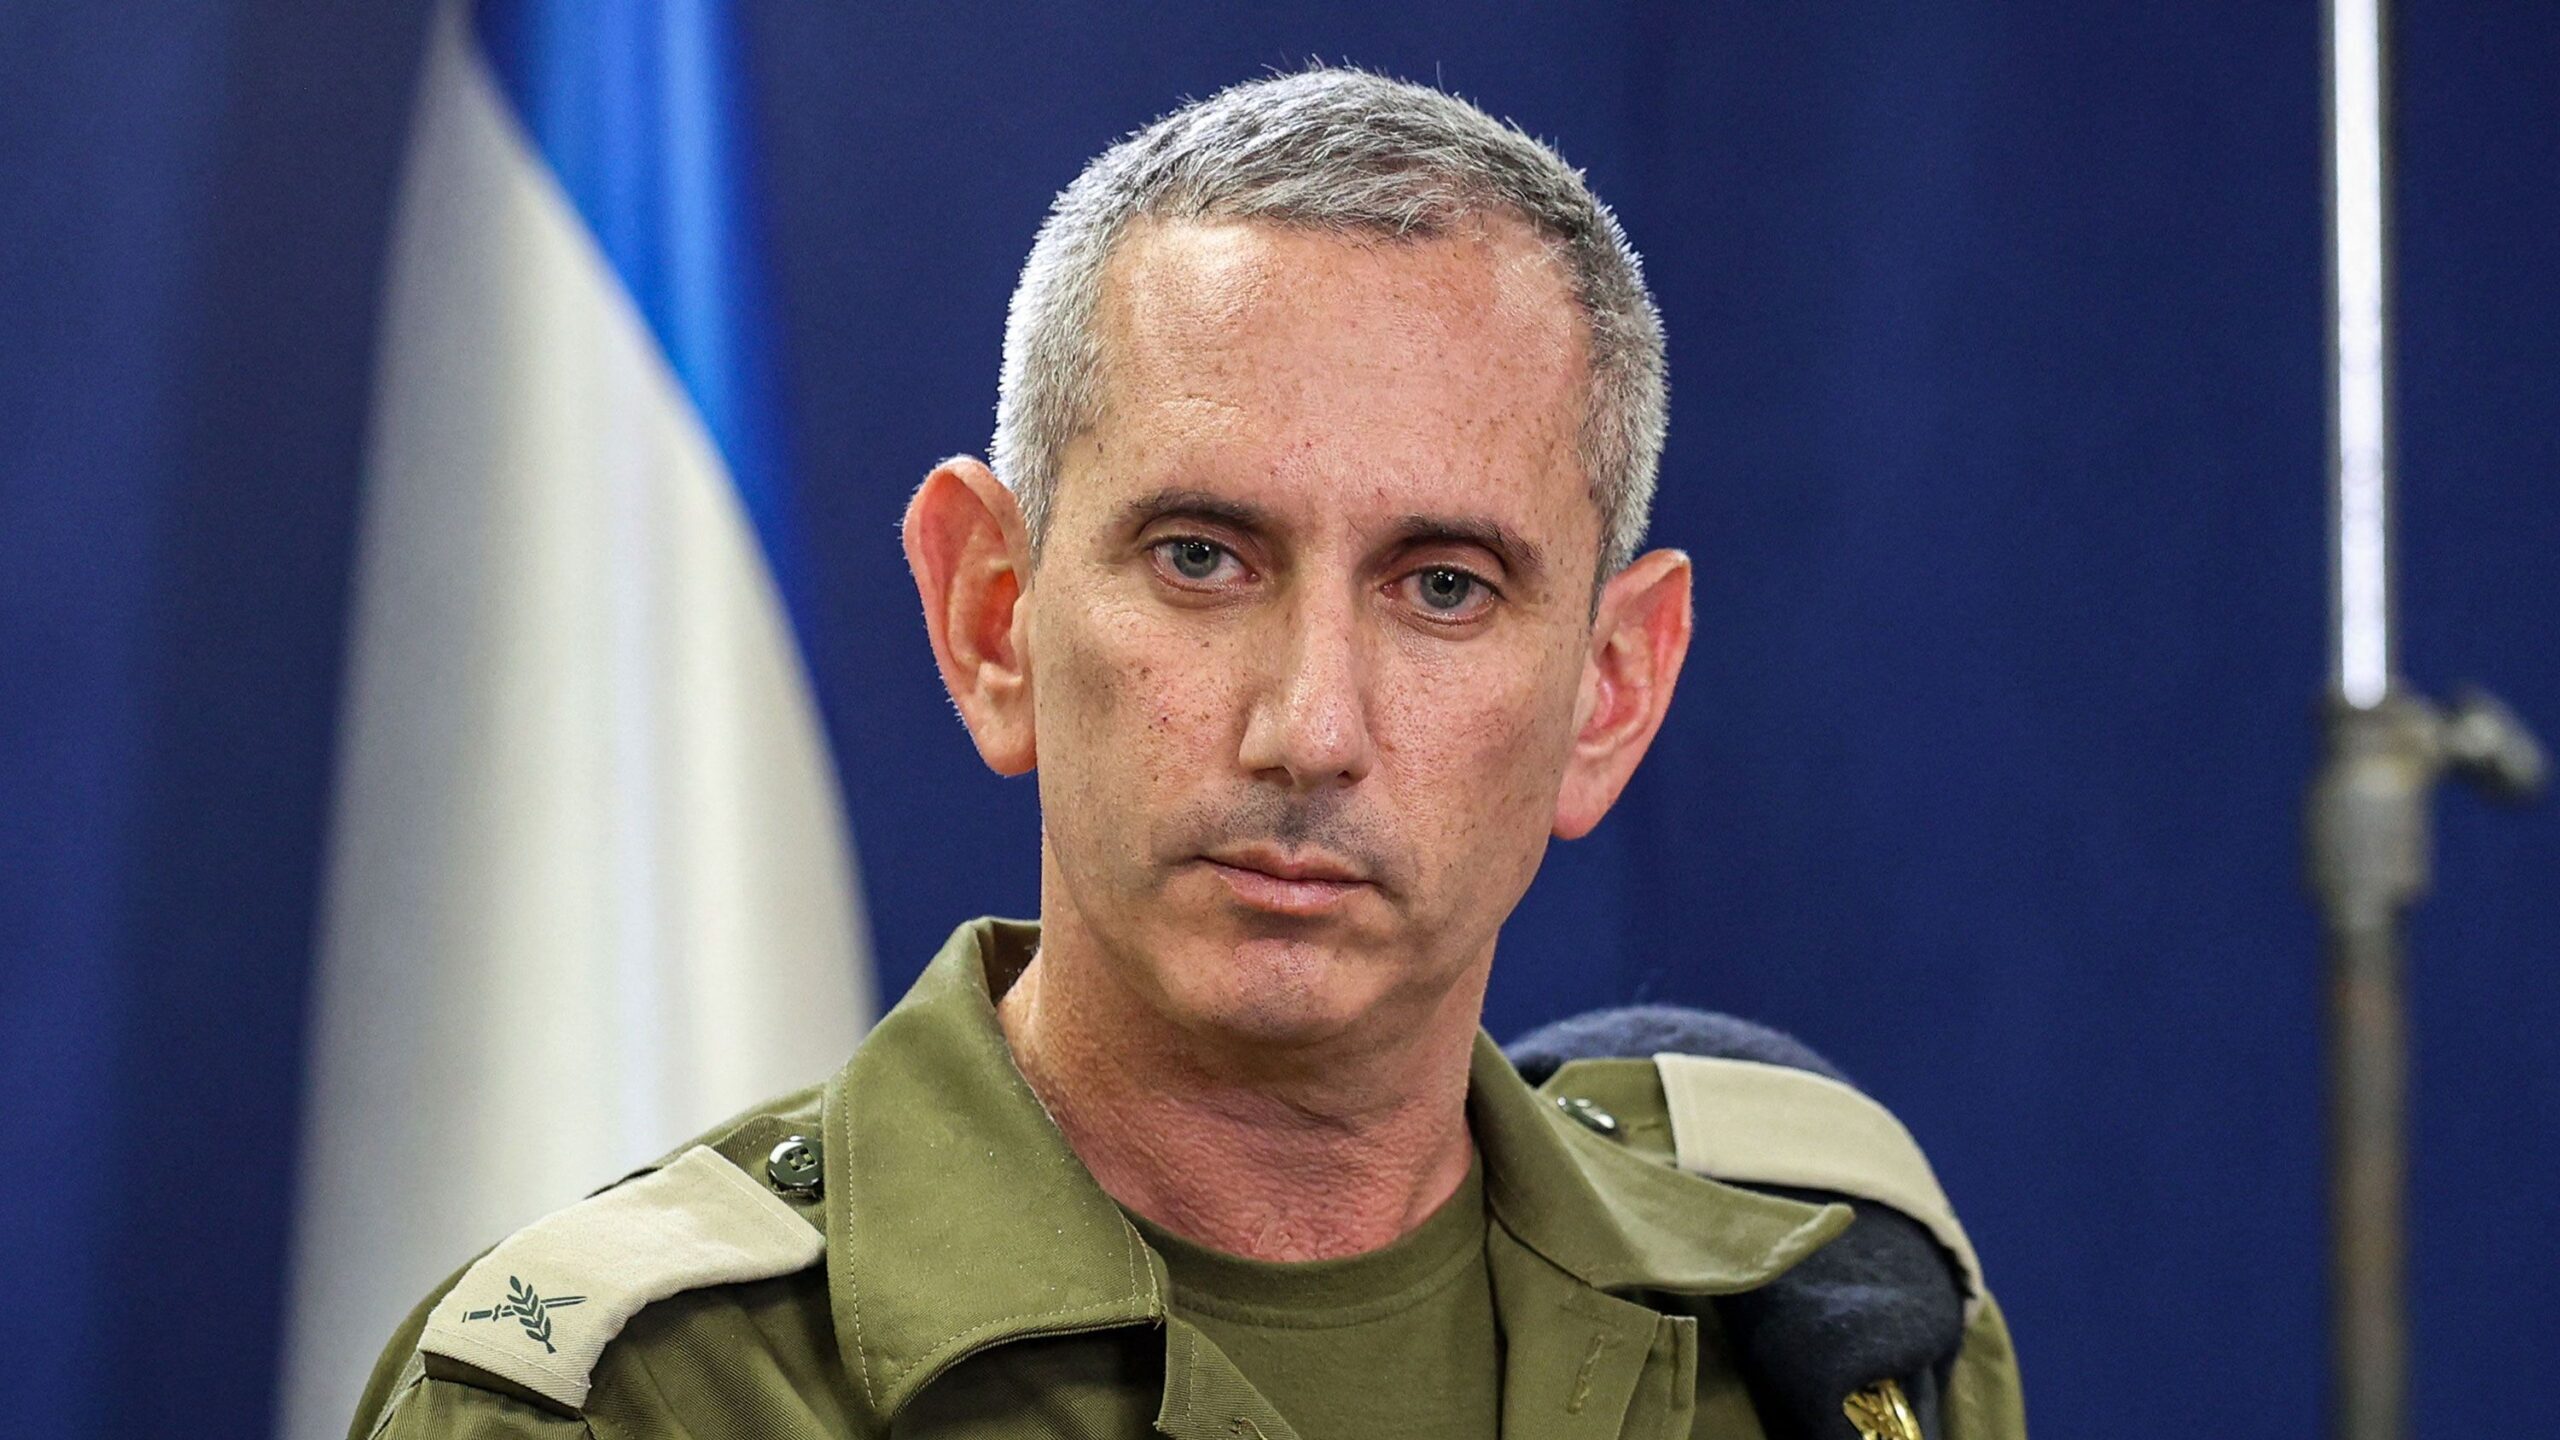 Iran has launched drones toward Israel, says IDF spokesperson Daniel Hagari, who is pictured here s...